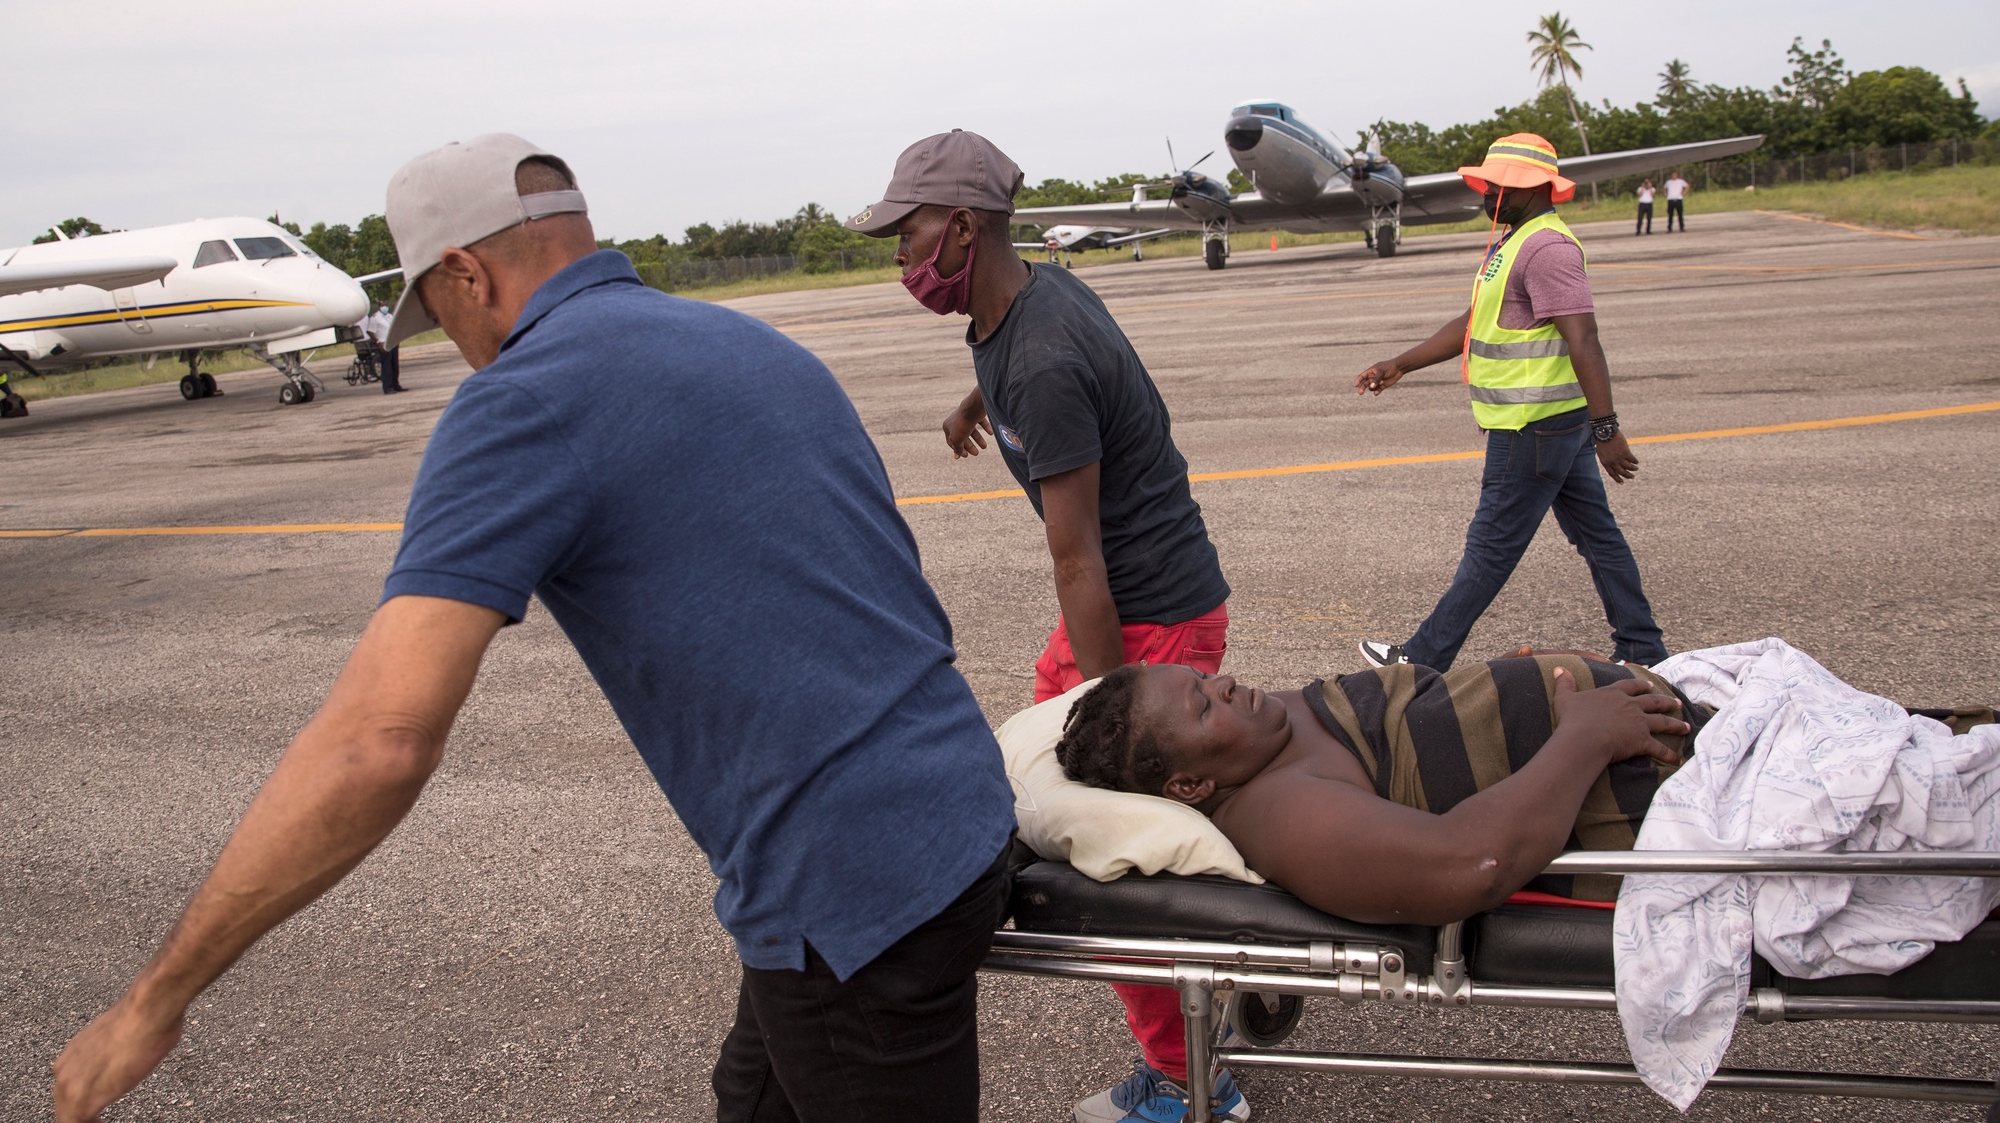 epa09420689 Some men carry a woman injured during the earthquake on a stretcher to be transferred by plane to a hospital in Port-au-Prince, from Les Cayes, Haiti, 19 August 2021. At least 2,189 people died and 12,268 were injured as a result of the 7.2 earthquake that devastated much of southern Haiti on August 14, in addition to substantial material losses, according to the latest official count.  EPA/ORLANDO BARRIA